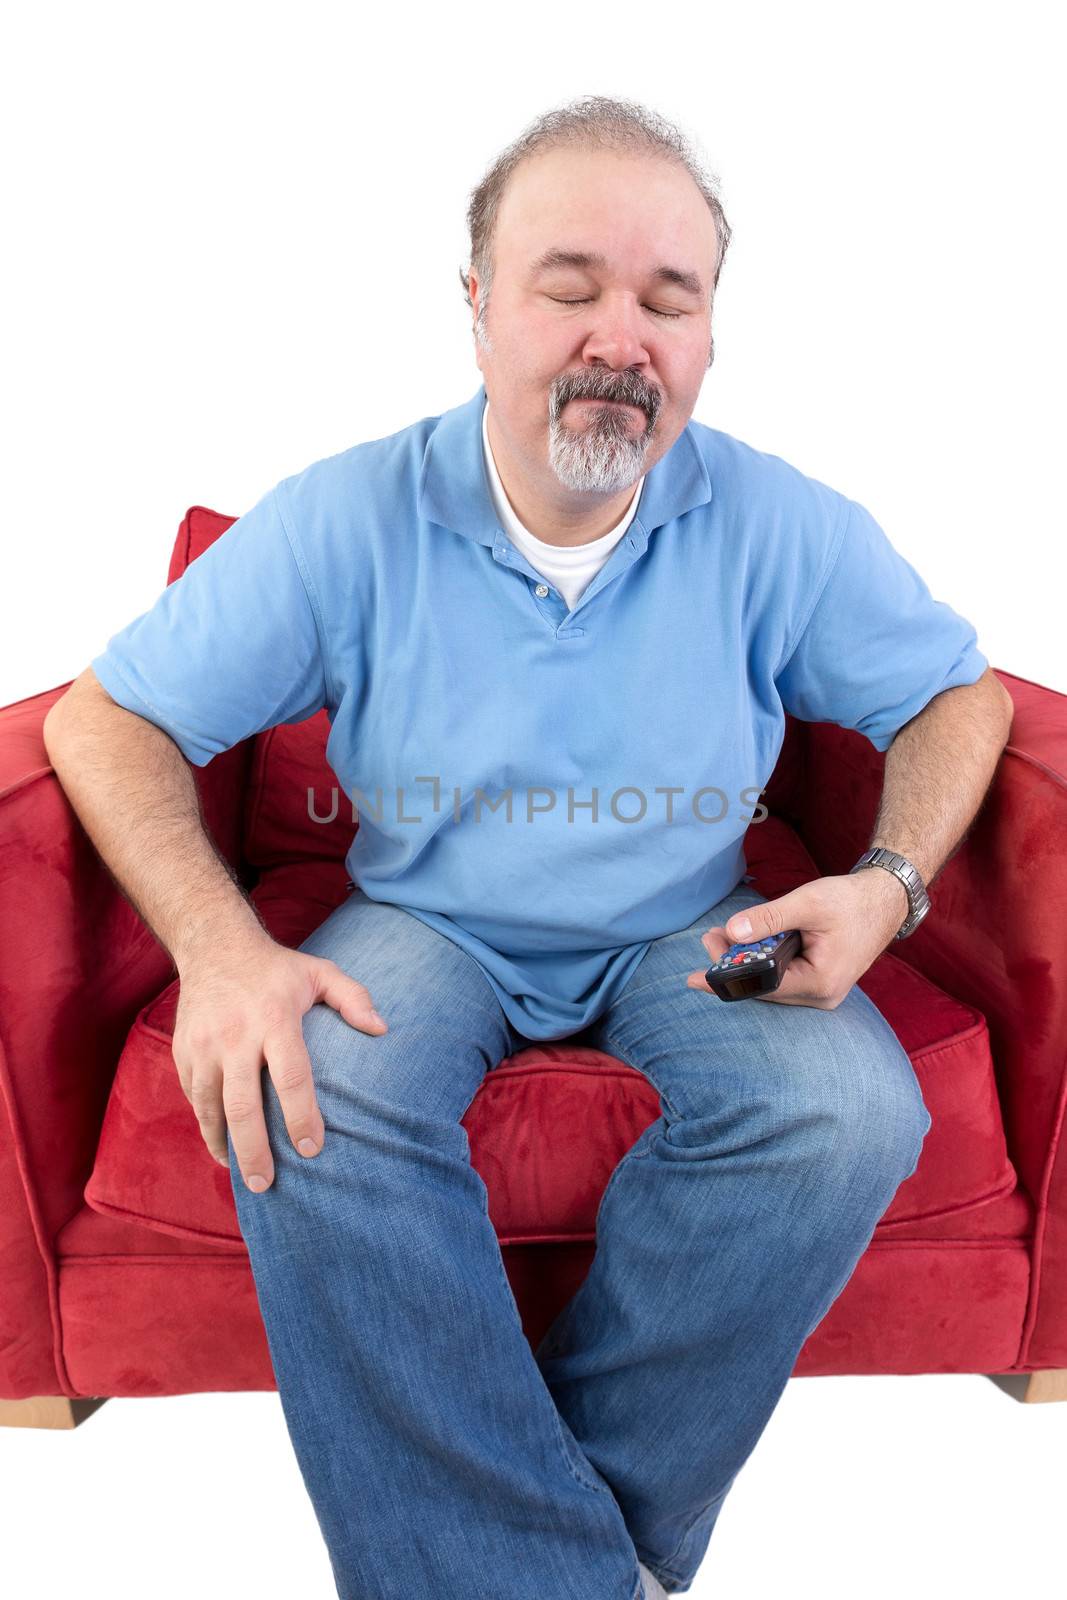 Middle-aged man with a beard holding remote control in his hand closing his eyes in resignation at something on the television isolated on white